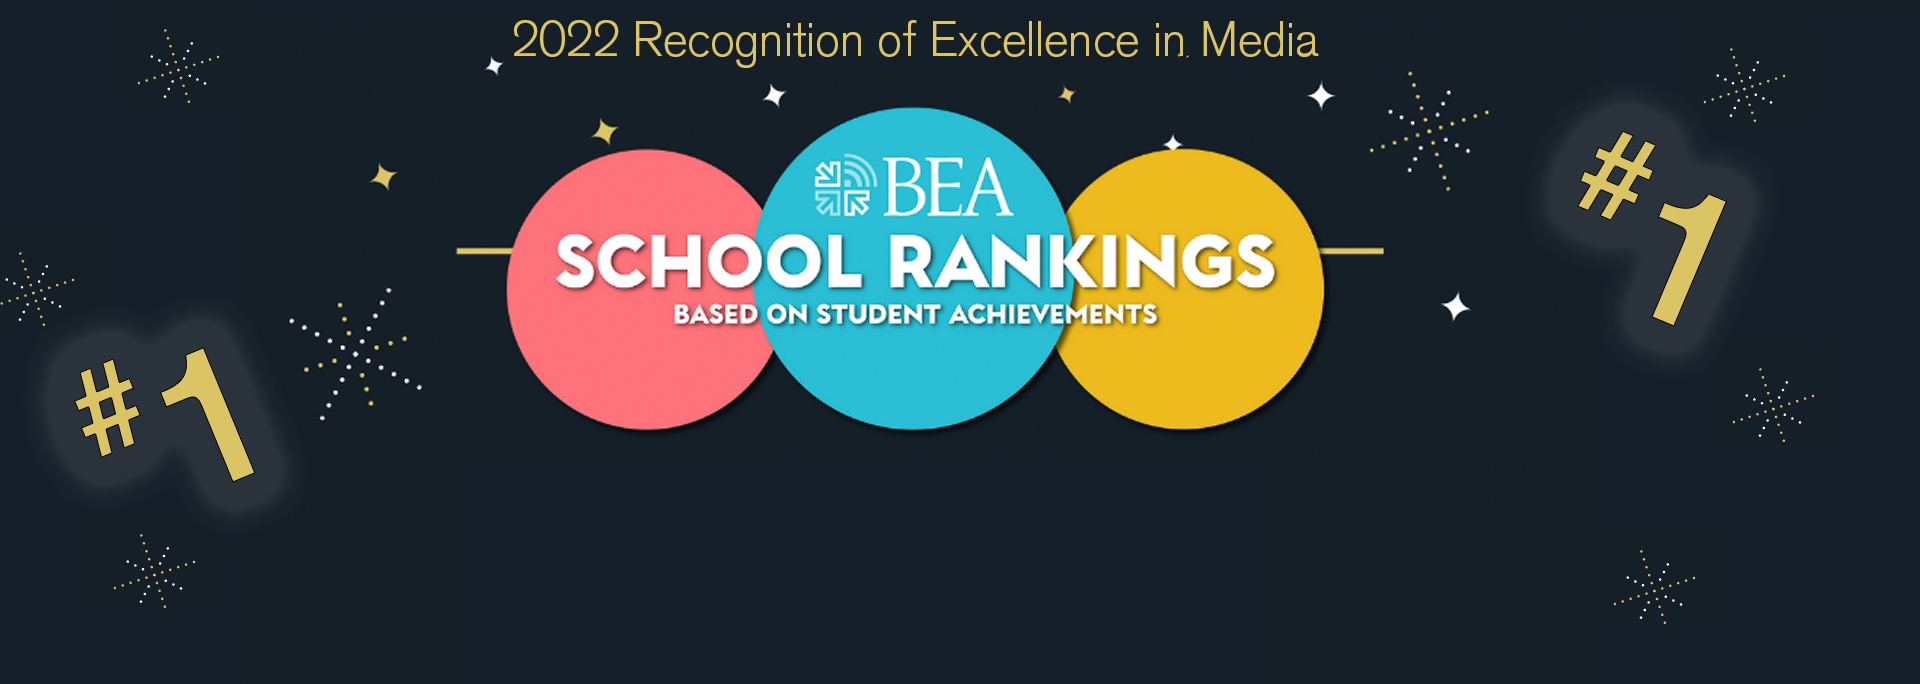 2022 BEA's recognition of excellence in media